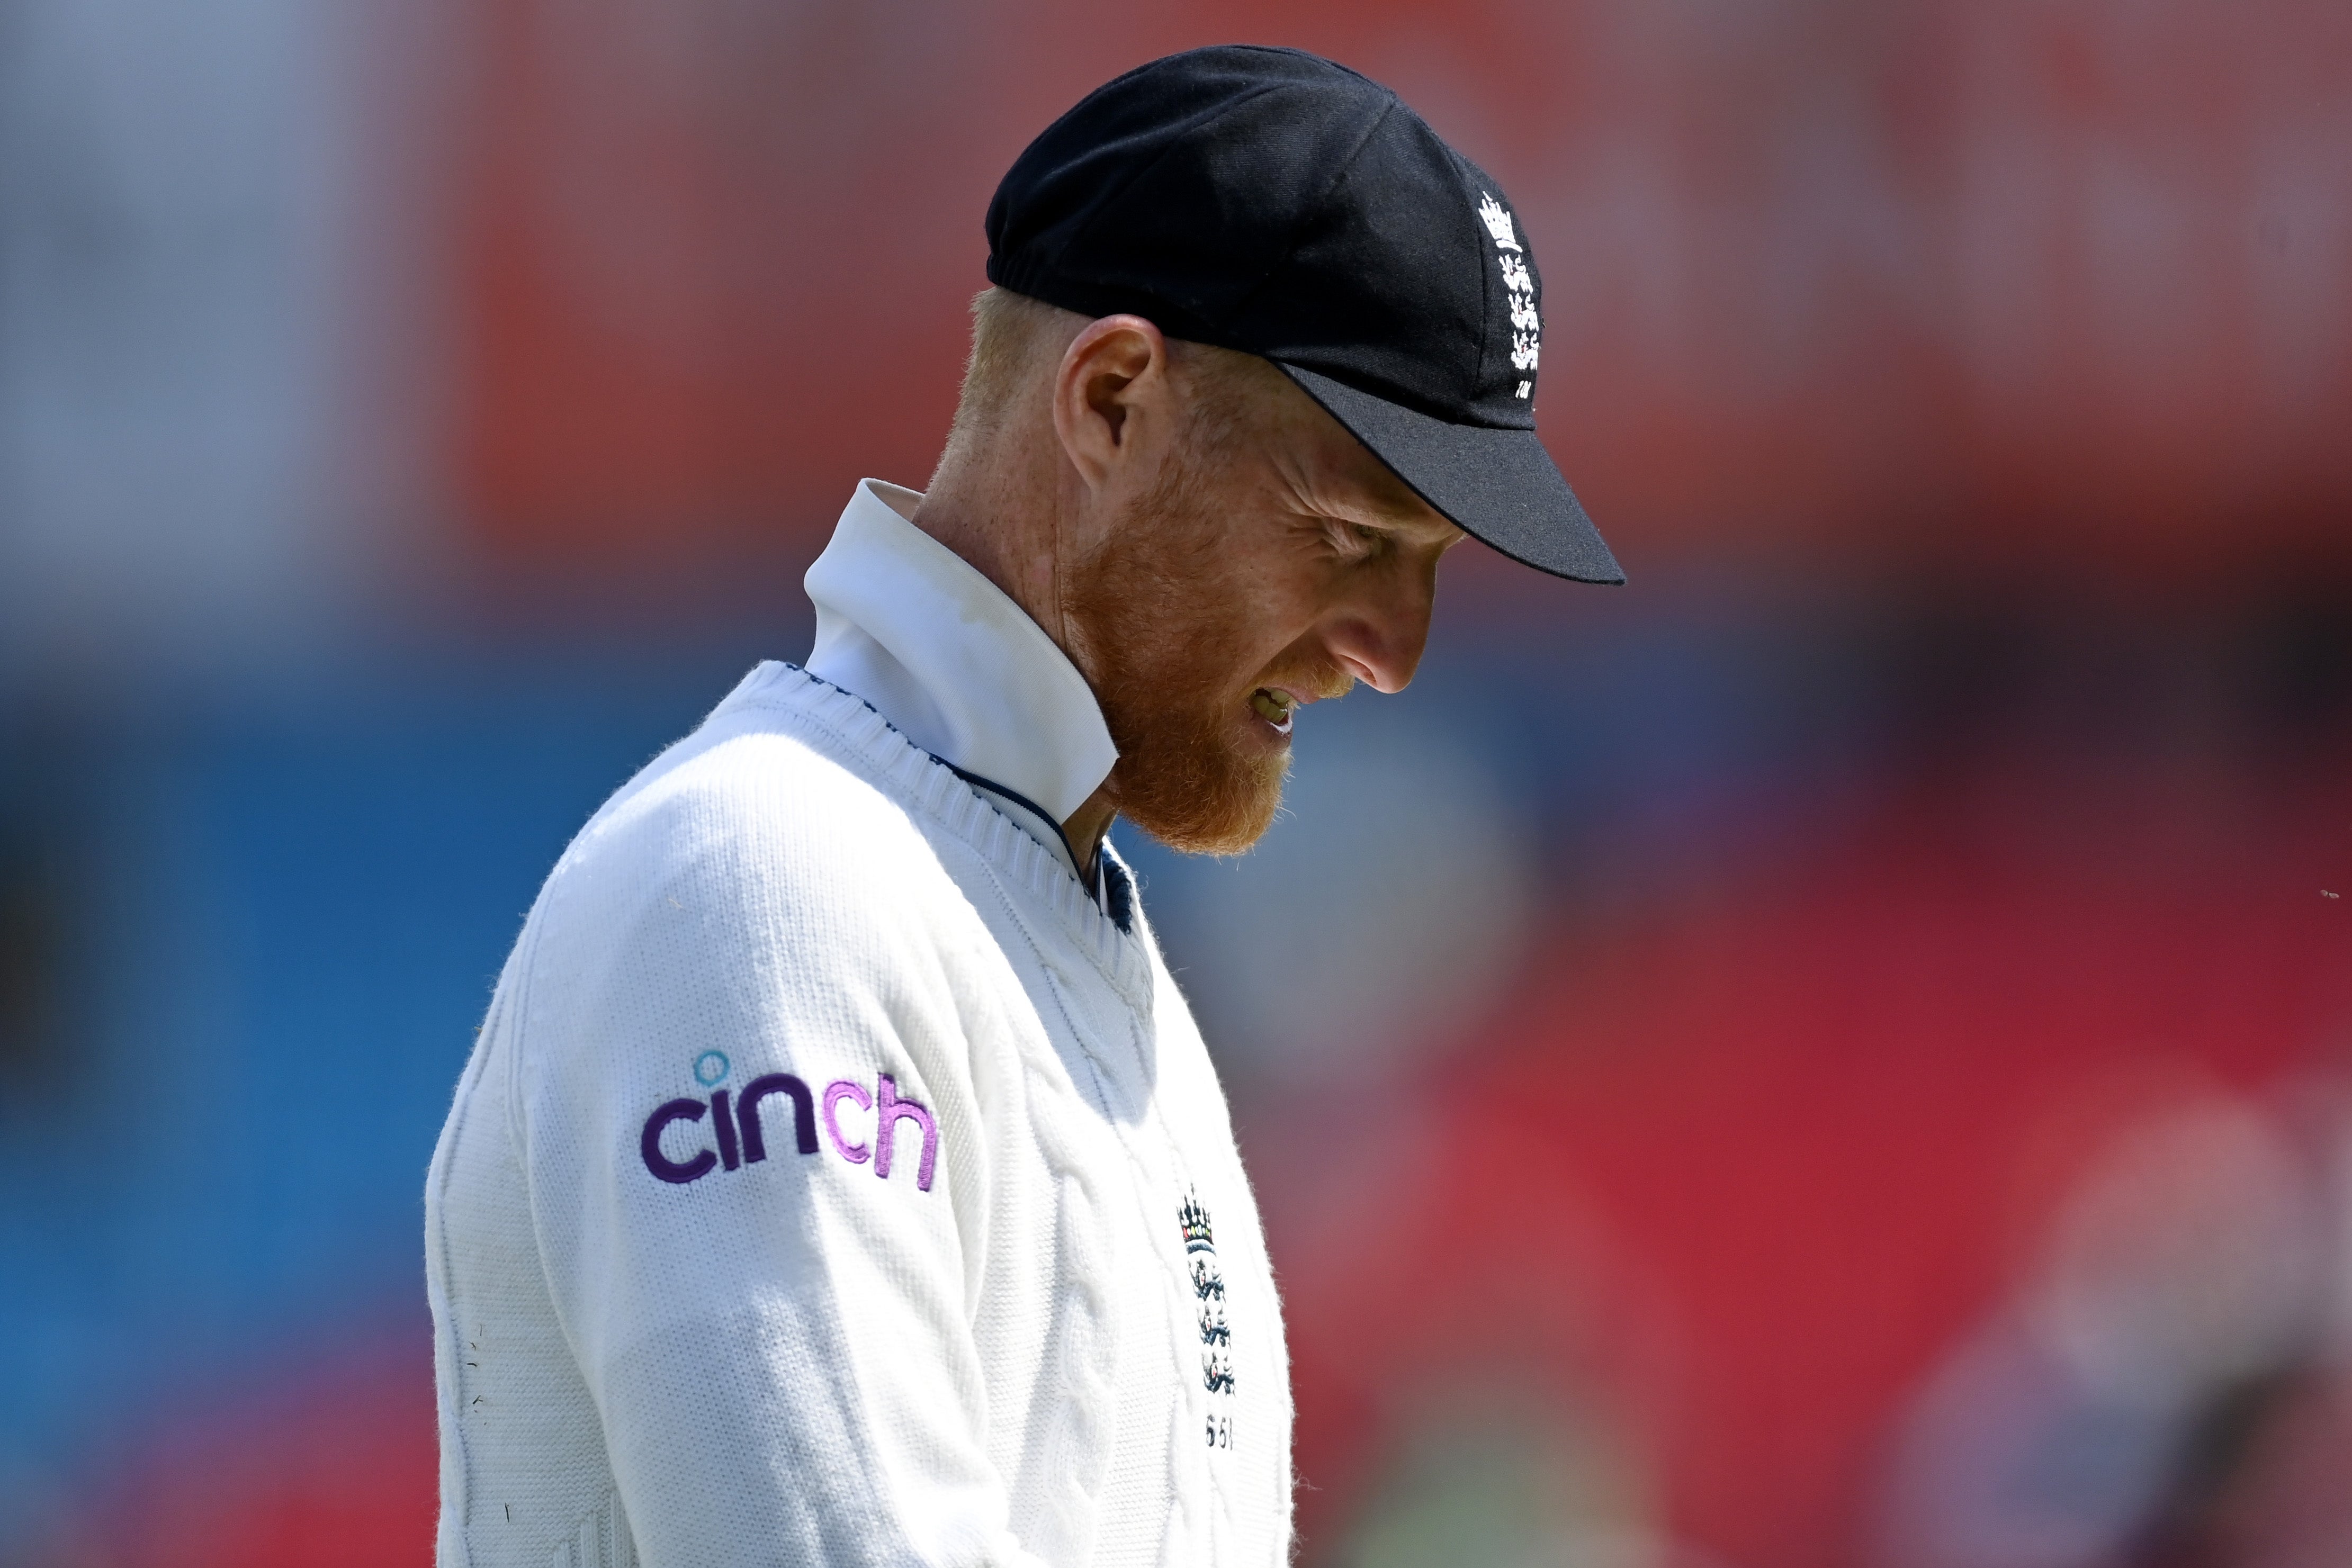 England were soundly beaten in the final Test match of the series in Dharamsala